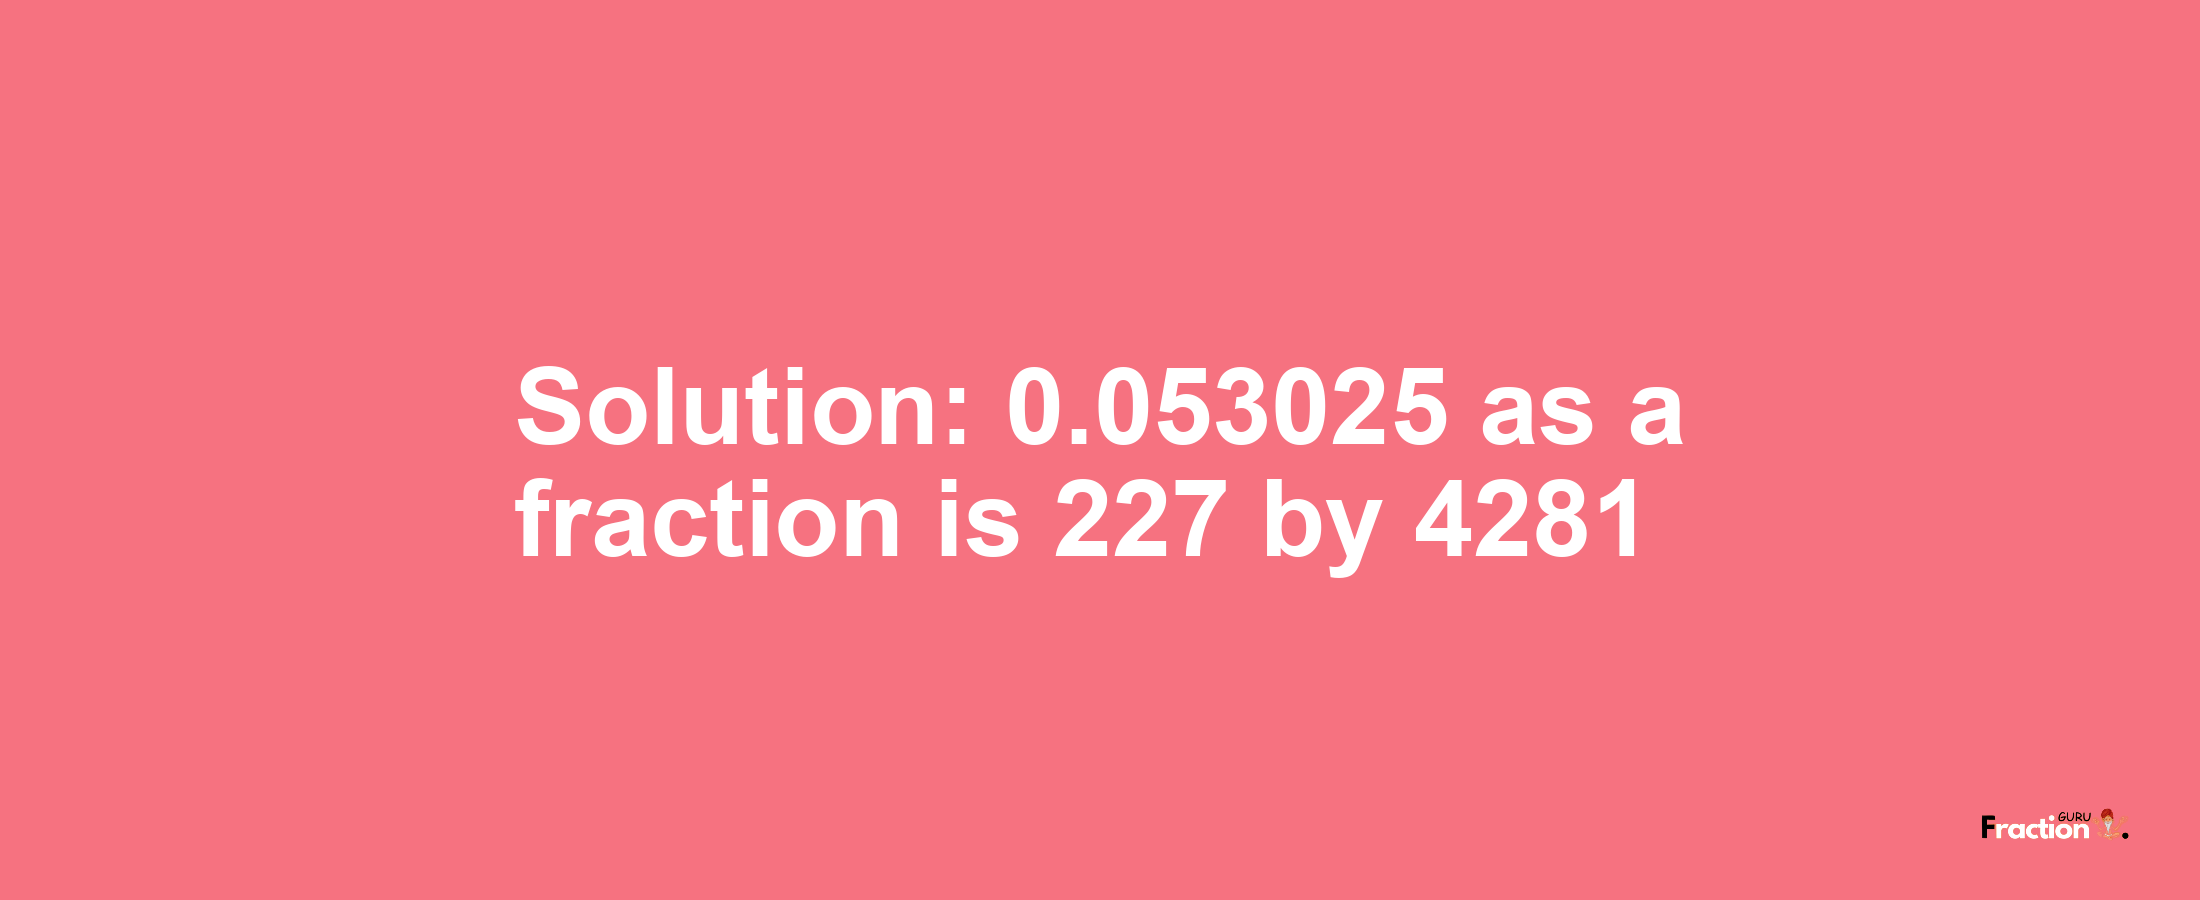 Solution:0.053025 as a fraction is 227/4281